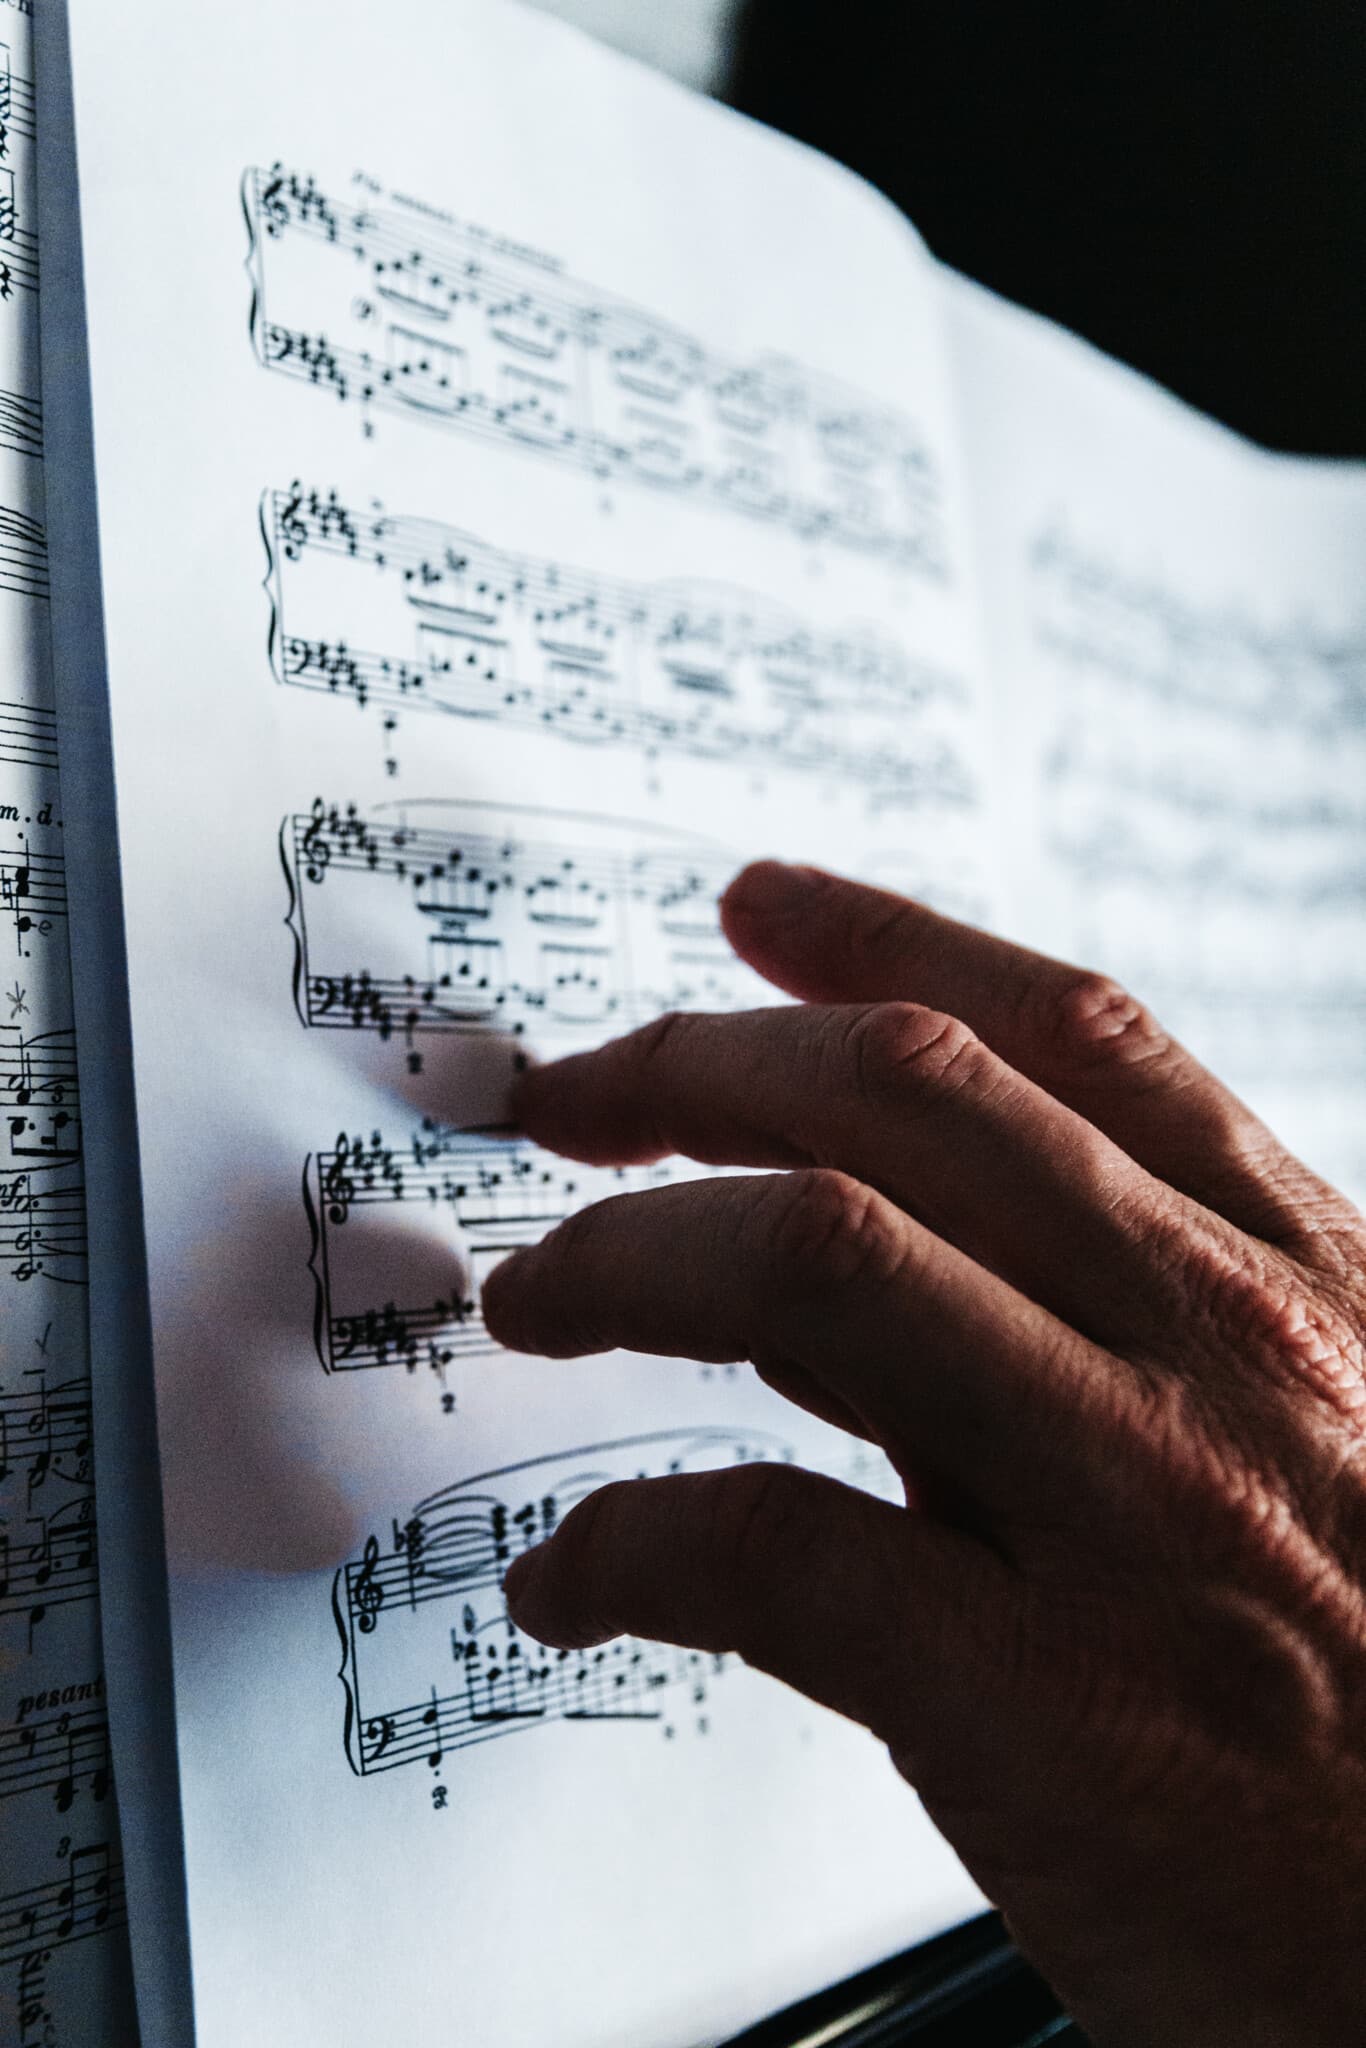 A persons hand touches the pages of sheet music.